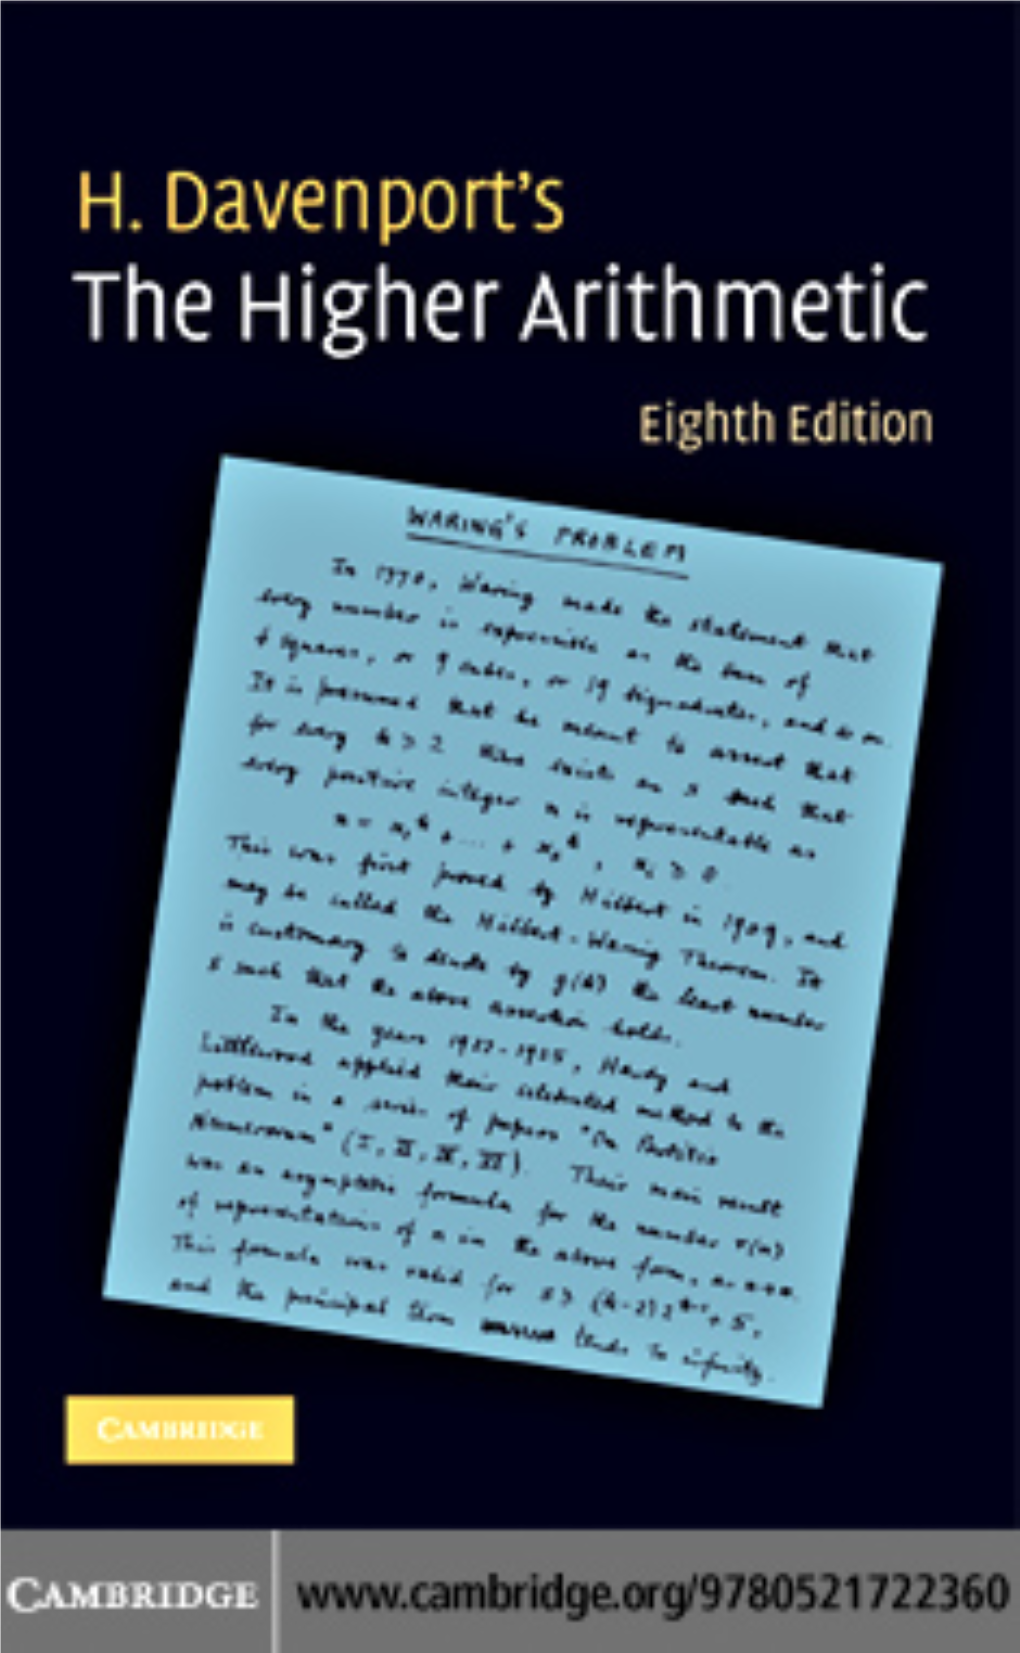 The Higher Arithmetic: an Introduction to the Theory of Numbers, Eighth